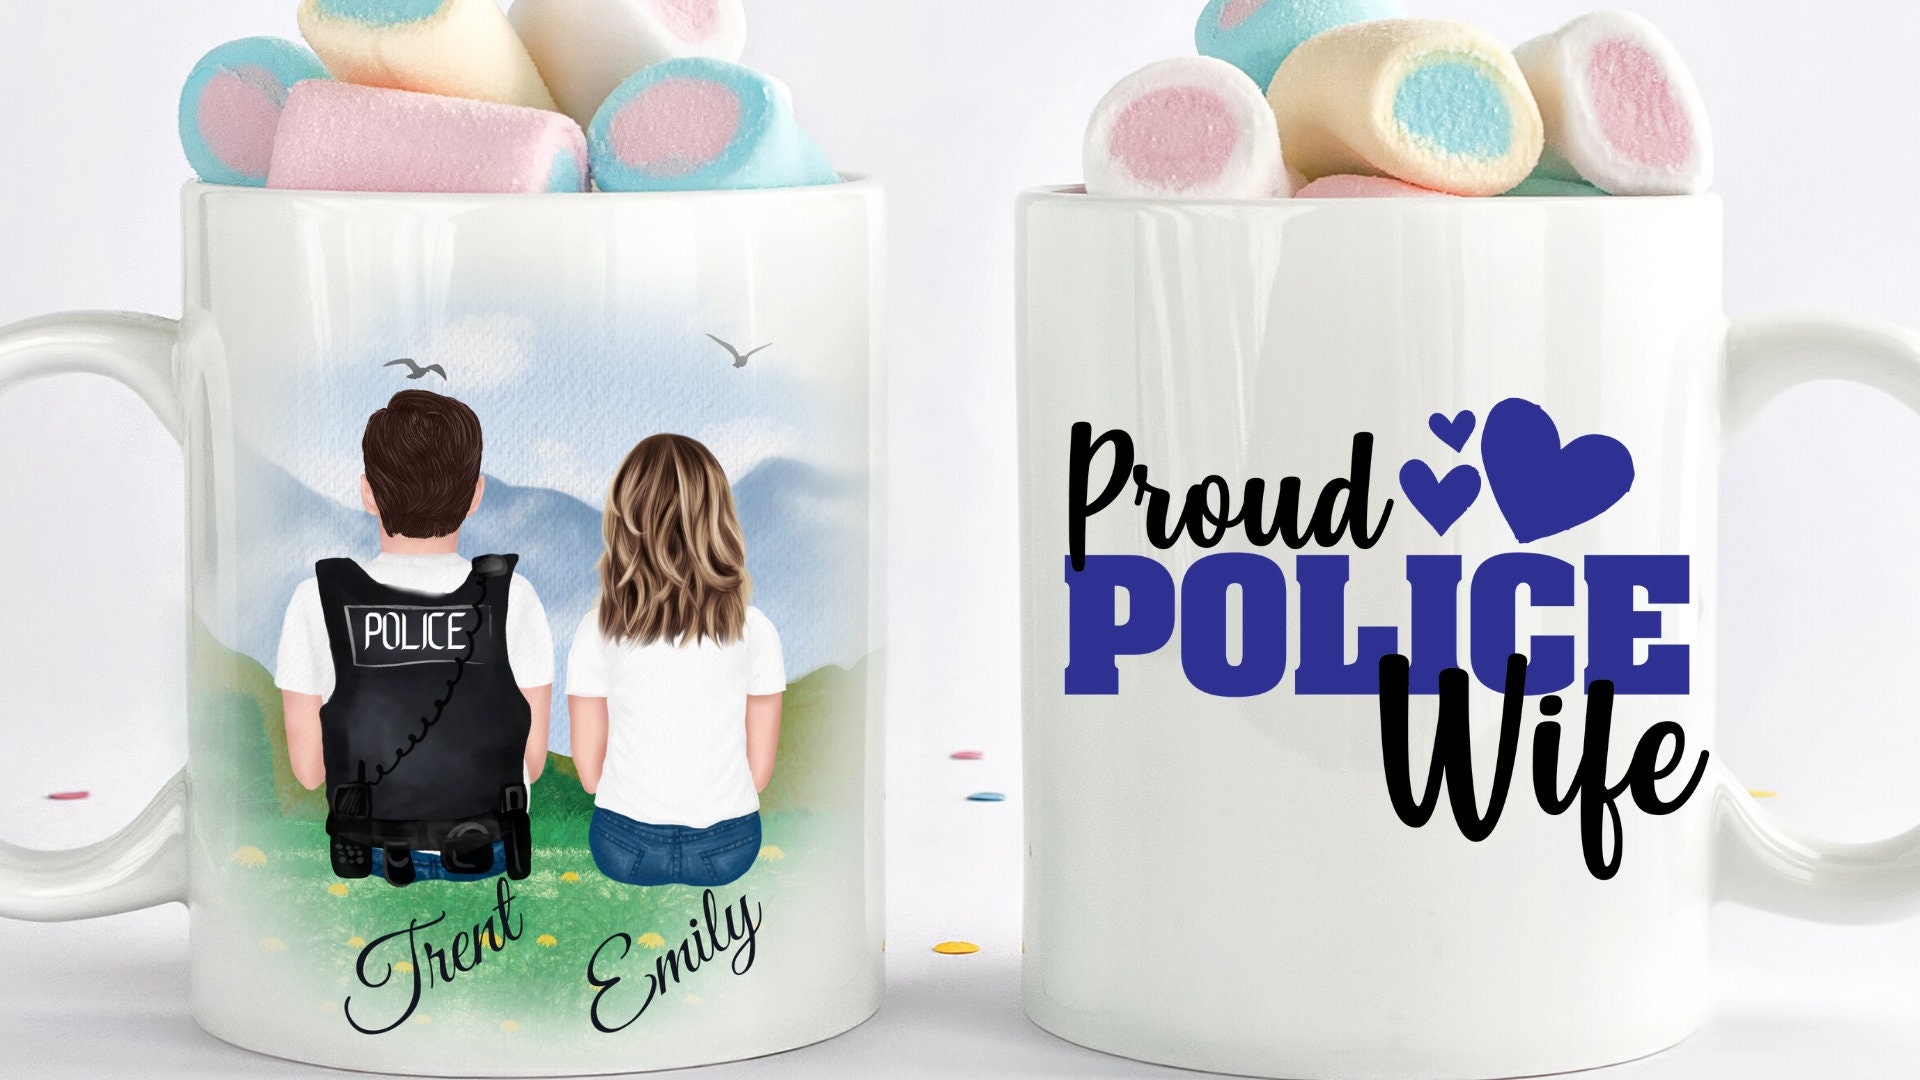 Police officer coffee mug - Some men become police officers - Funny Cop  gifts